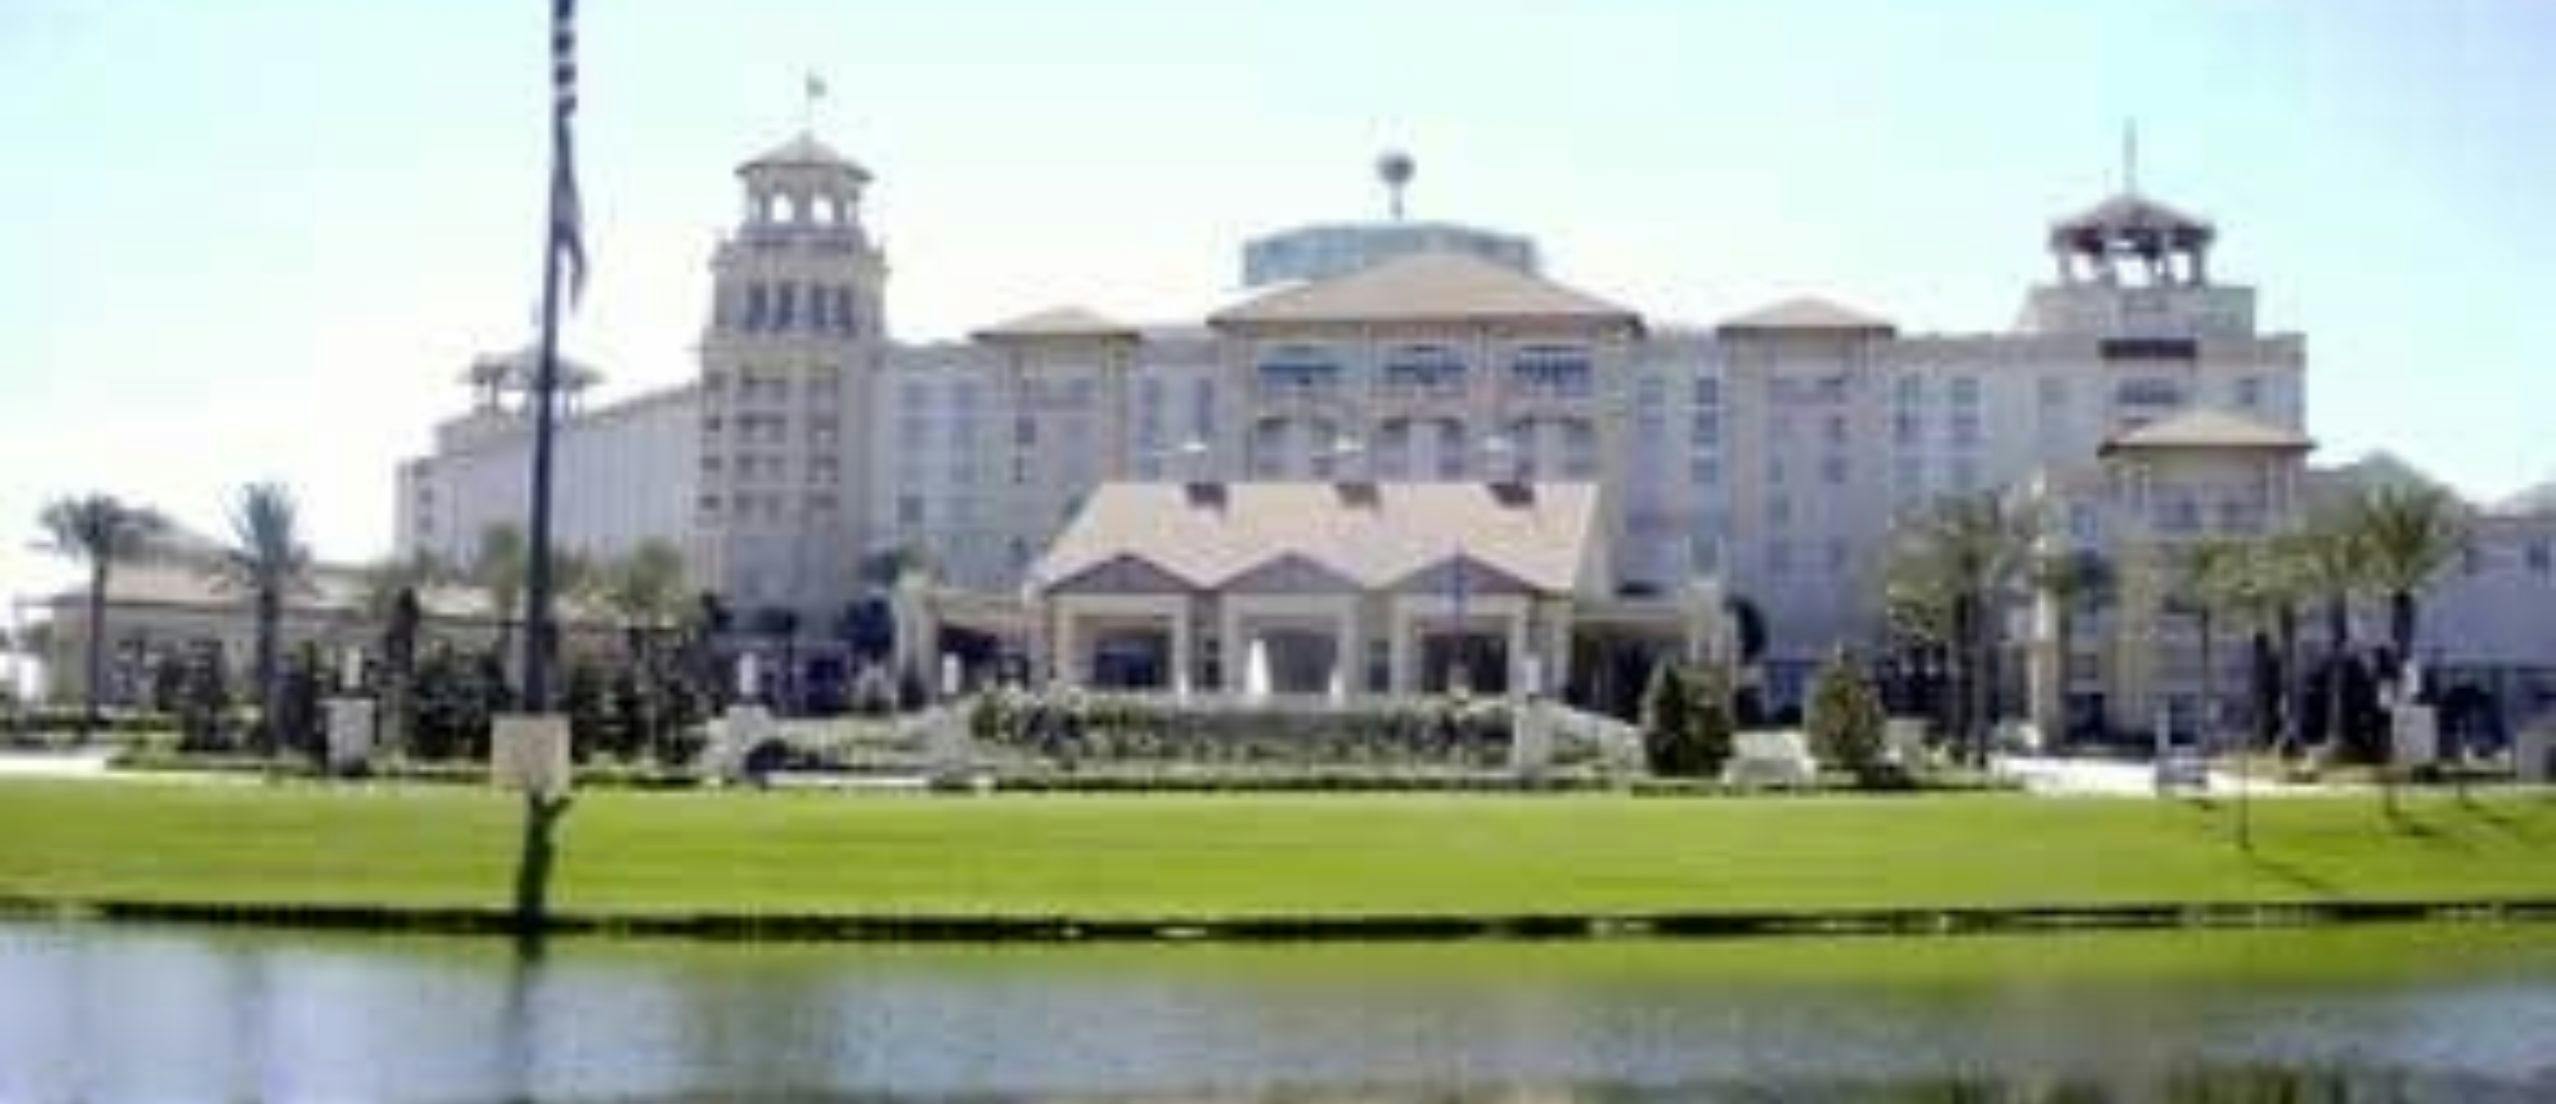 The Gaylord Palms in Orlando